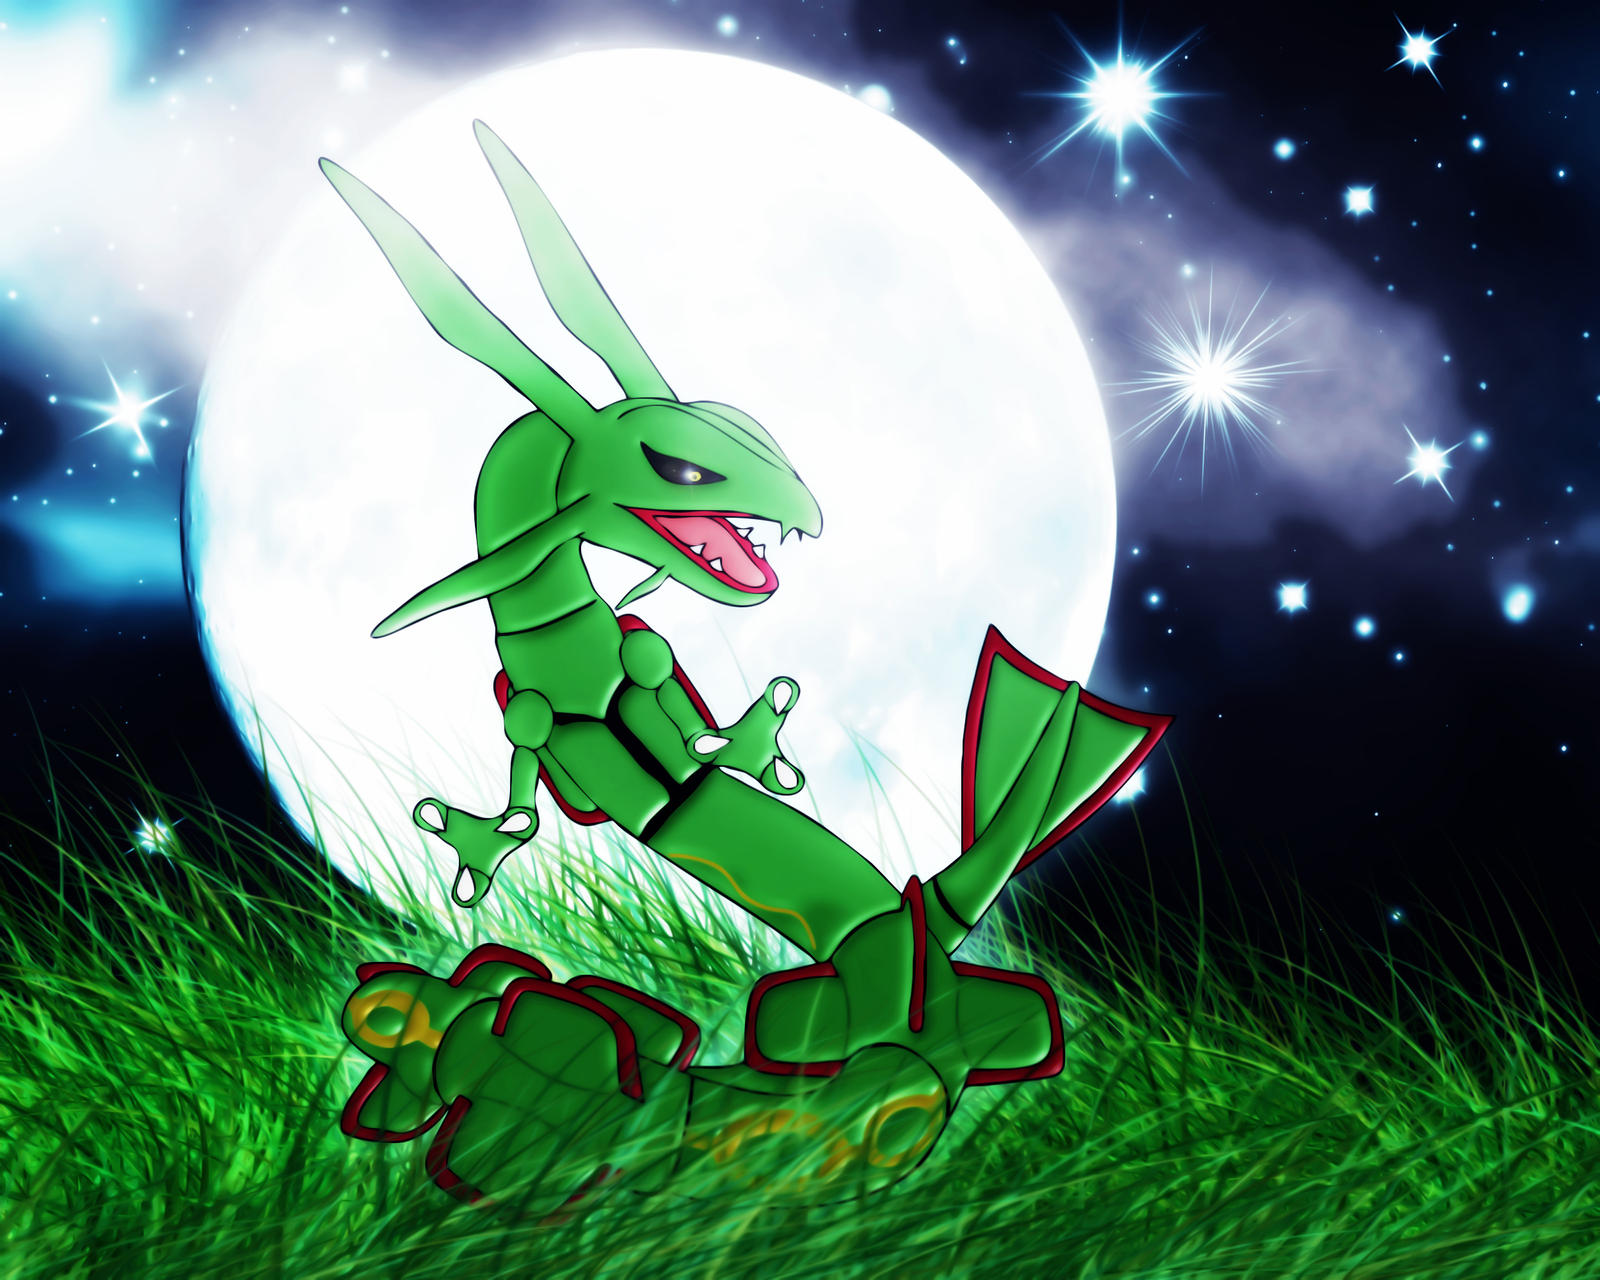 [Image: rayquaza_in_the_moonlight_by_blooddragonx.jpg]